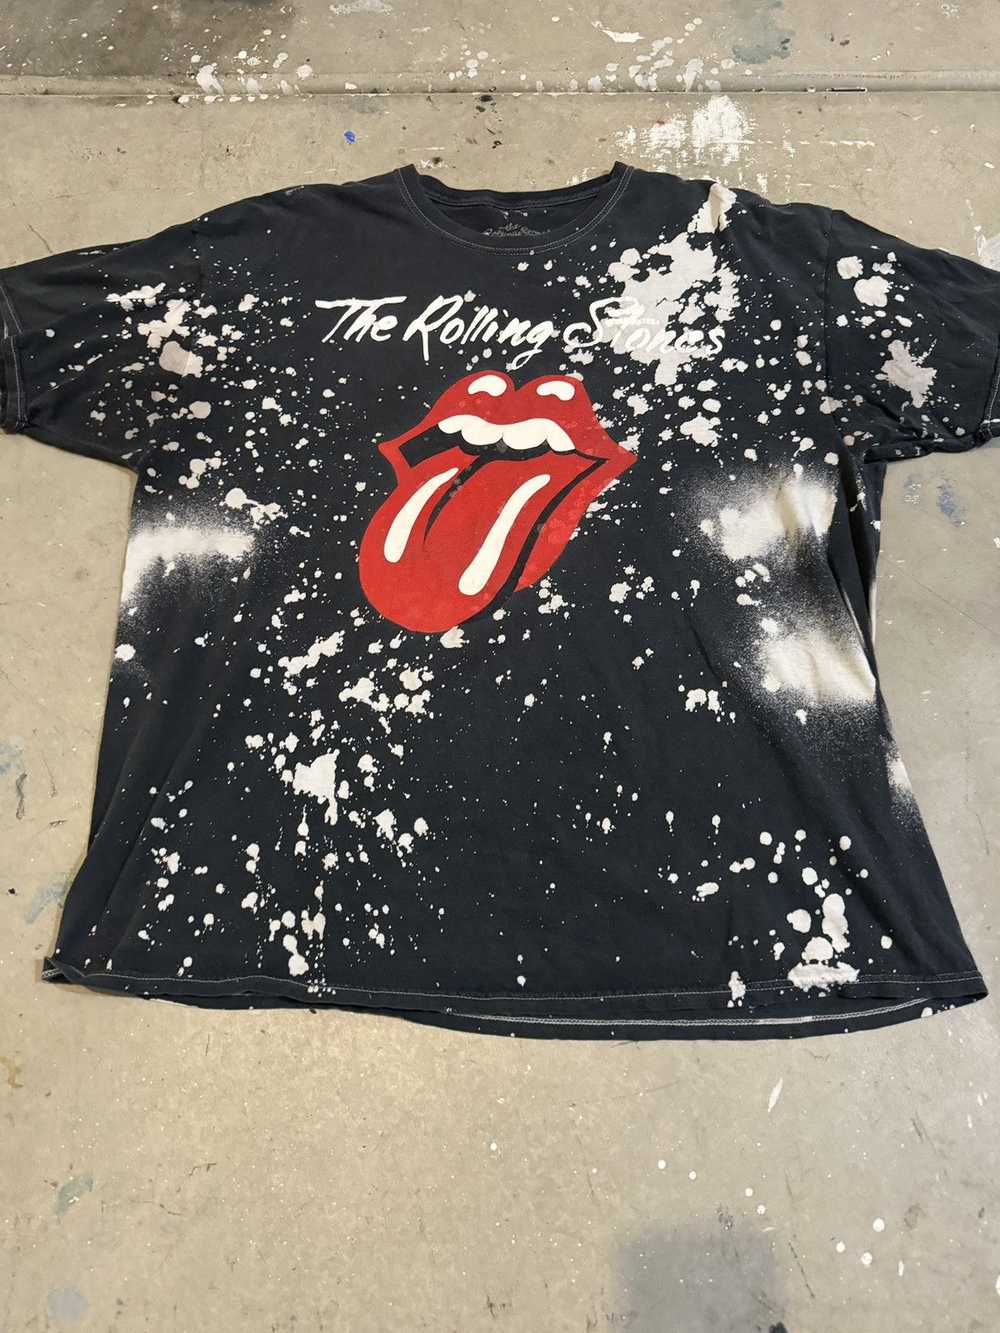 The Rolling Stones Thrifted Rolling Stones T shirt - image 1